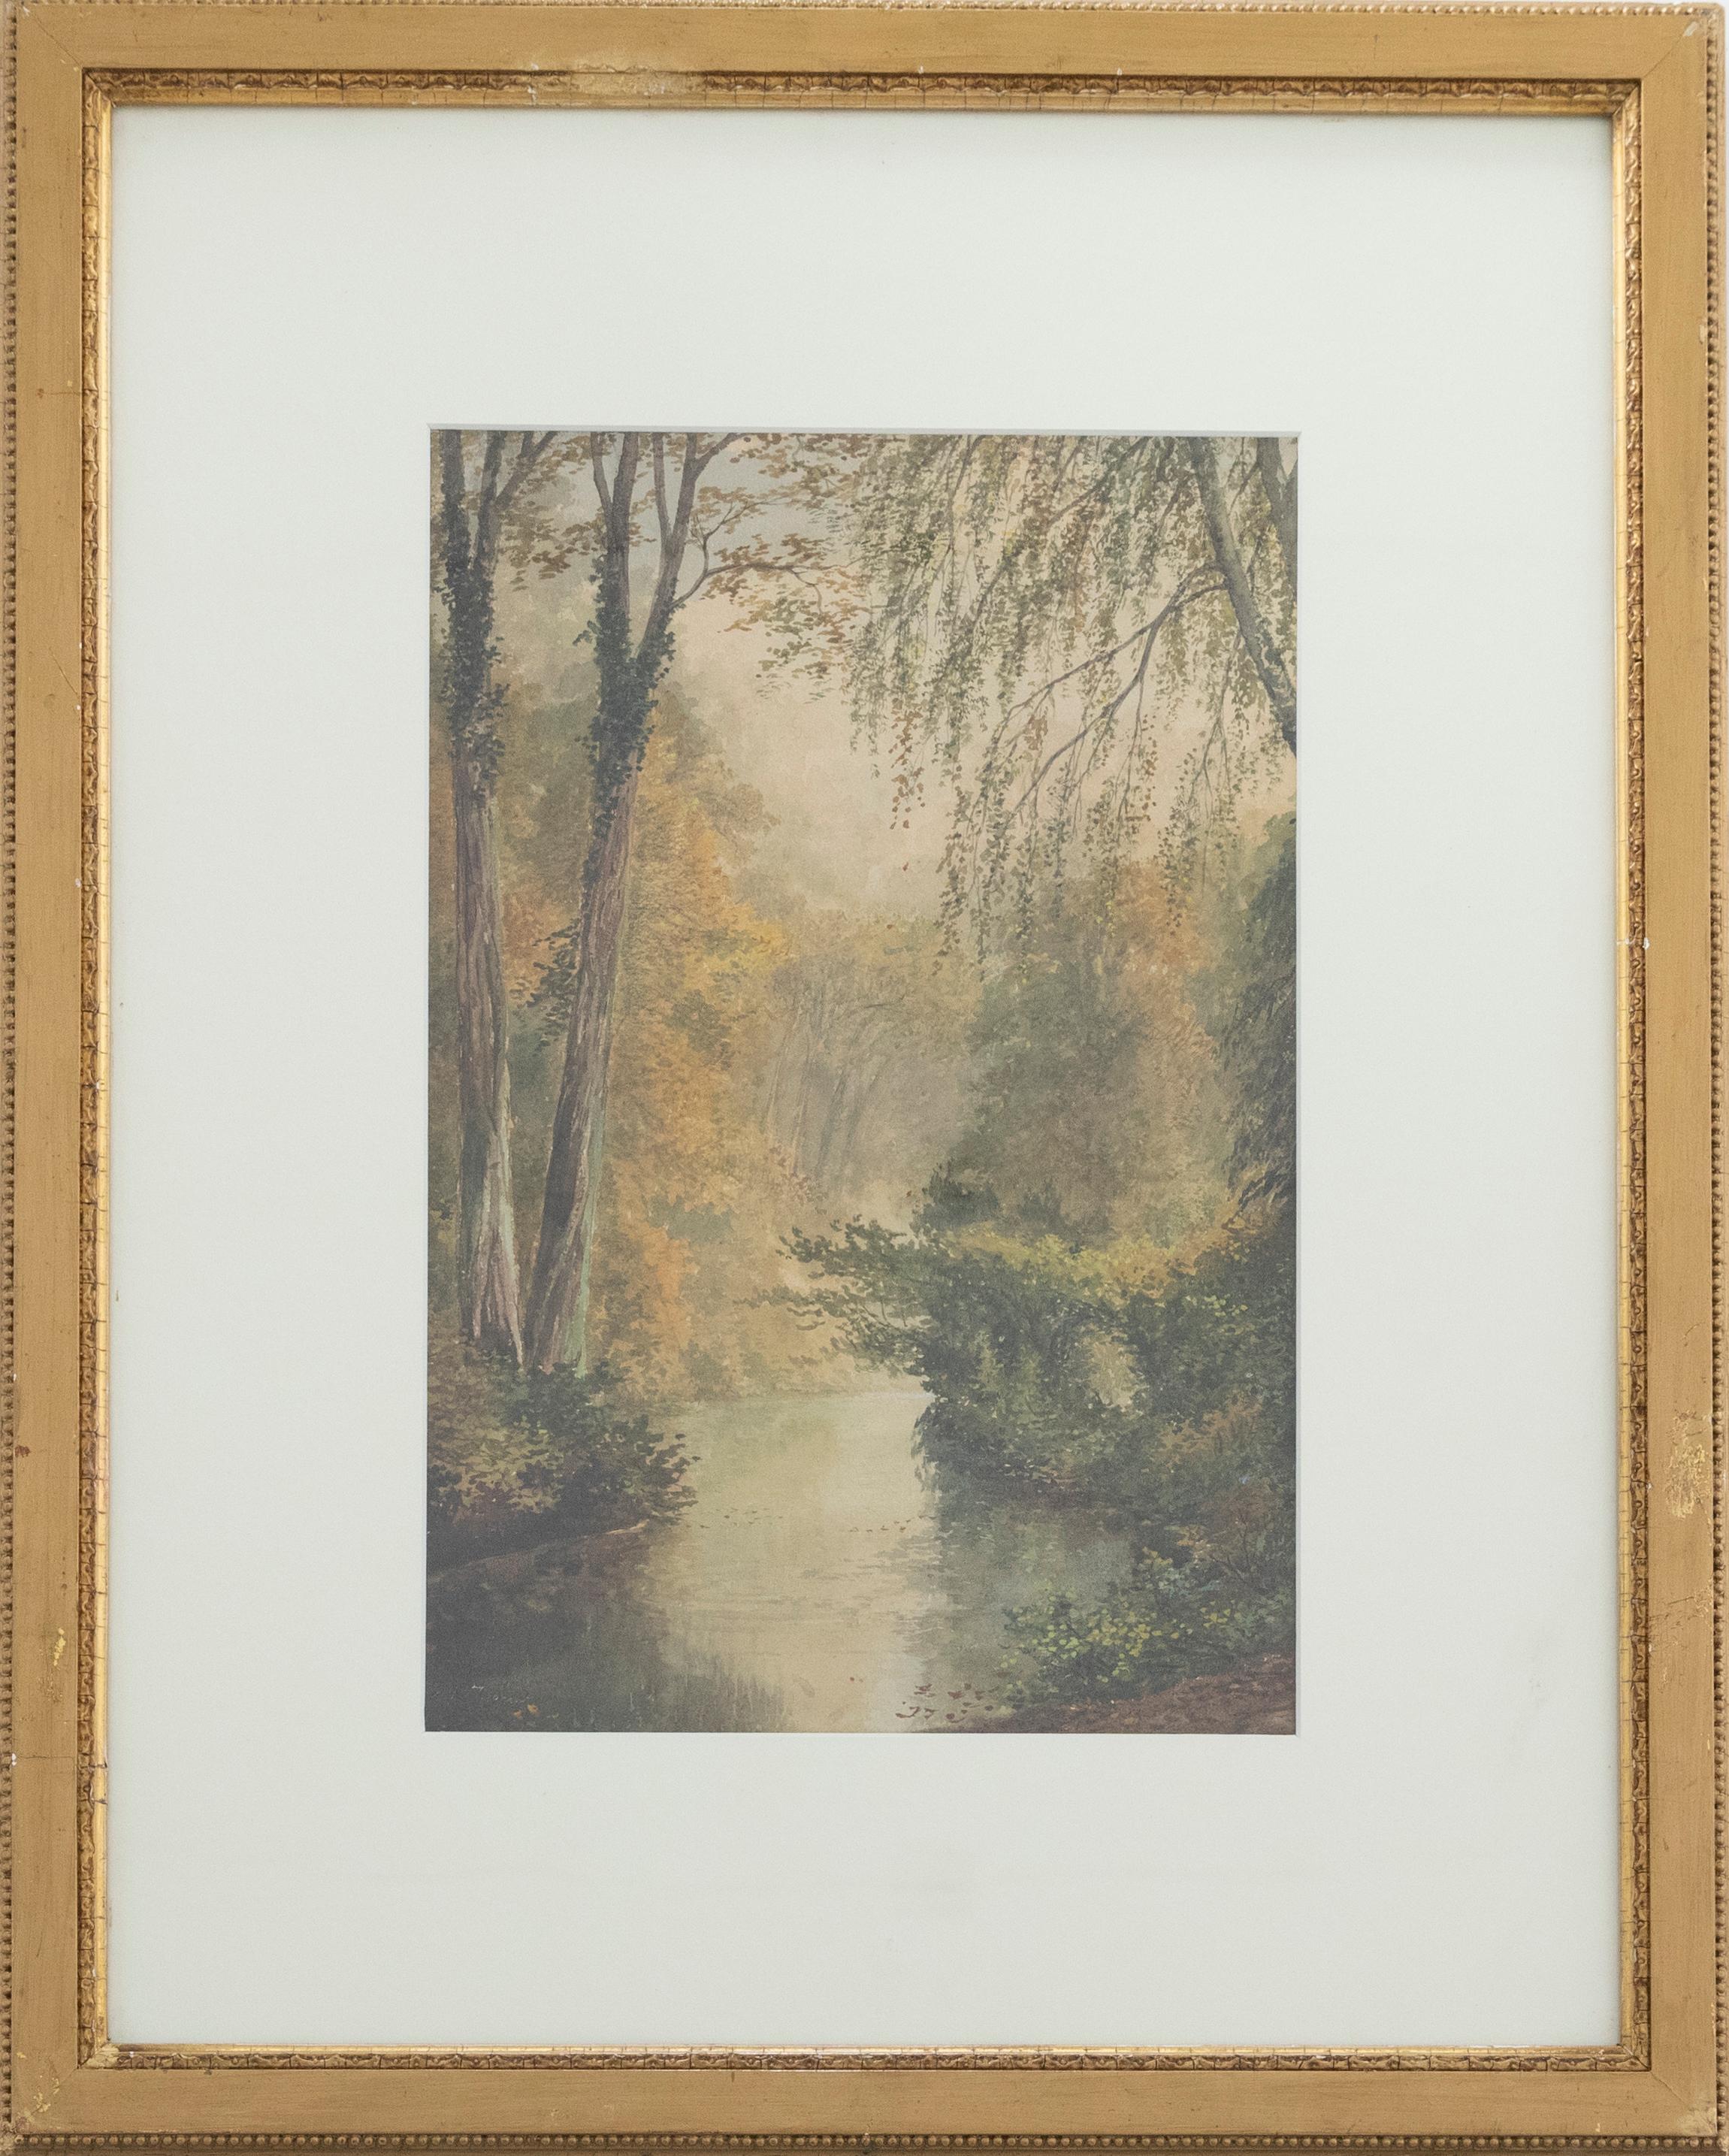 A charming woodland watercolour by 19th century artist E. J. Turner. The scene depicts a quiet pool of water running still amongst weeping trees and dappled shade. Presented in a gilt-effect frame with running pattern mouldings and new card mount.